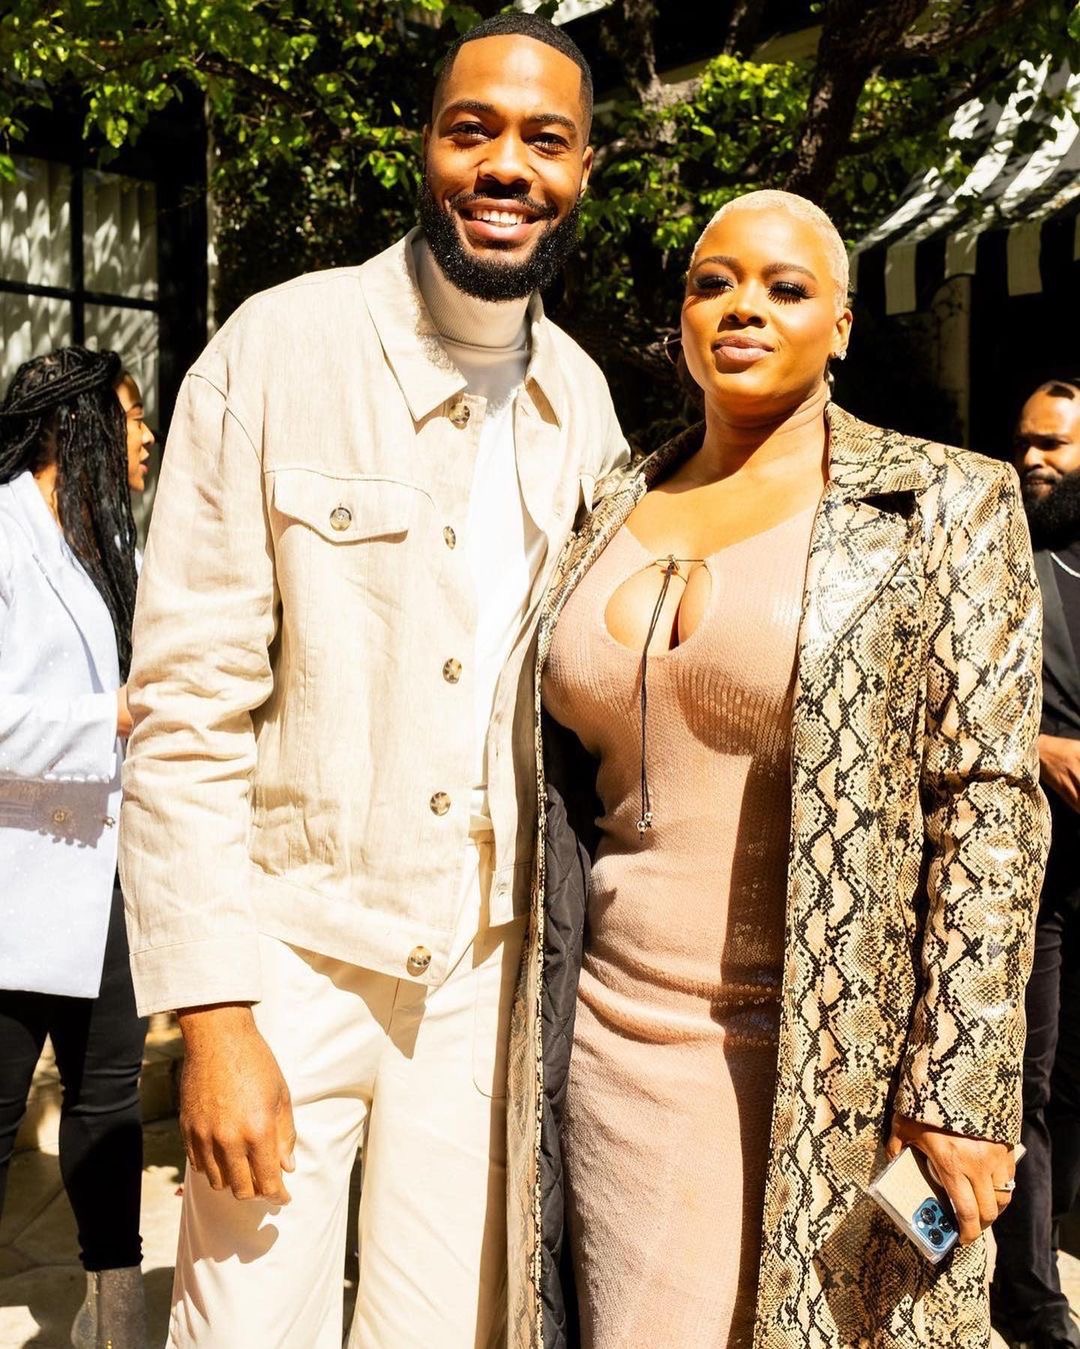 On the Scene at The Black Excellence Brunch Niecy Nash Opts for Custom Jessica Betts in Richfresh Tabitha Brown in Je Taime Claire Sulmers in Zcrave More 8